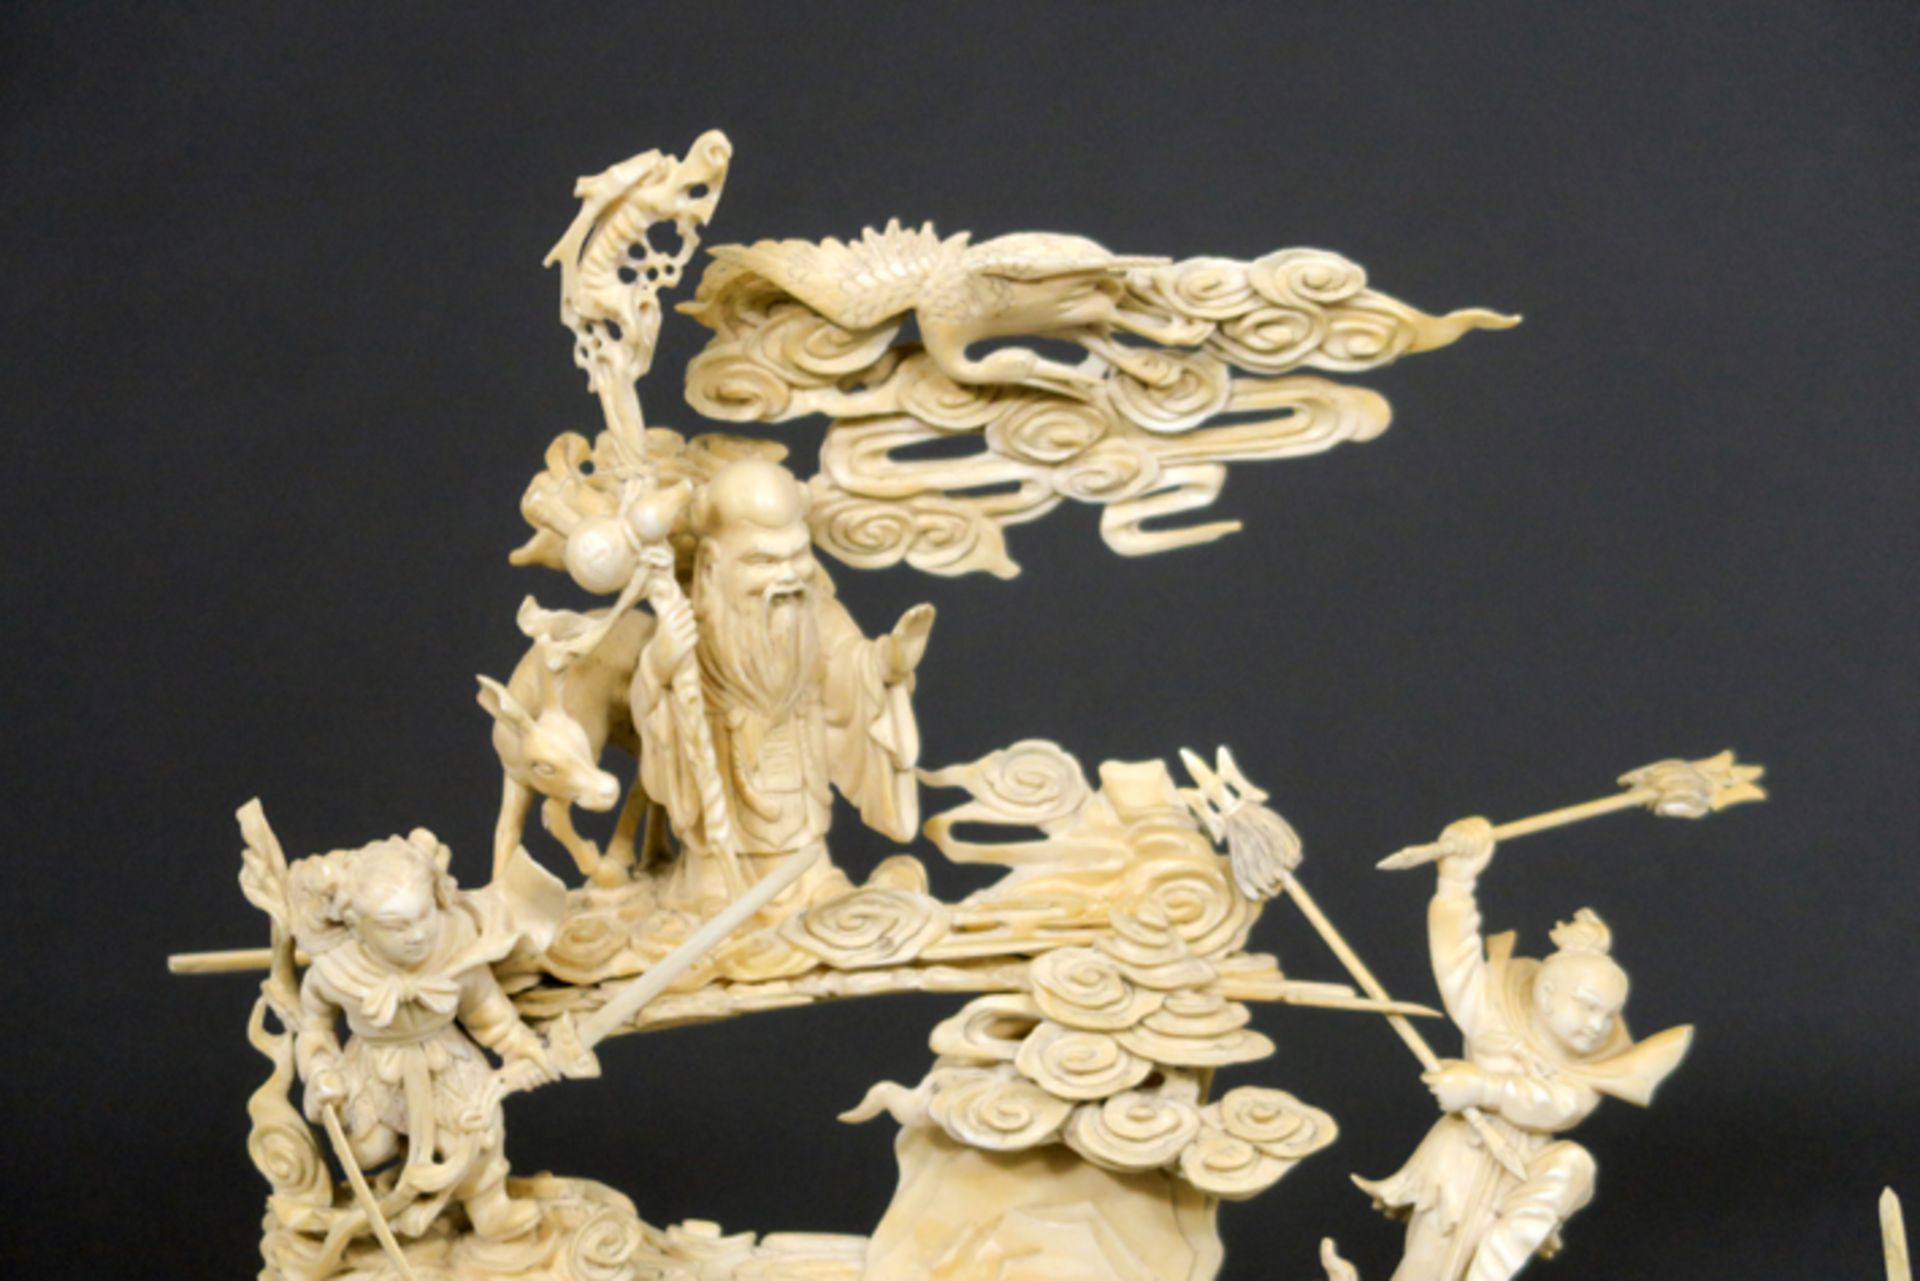 19th Cent. Chinese "Sage with three figures in the clouds" sculpture in ivory - - [...] - Image 4 of 6